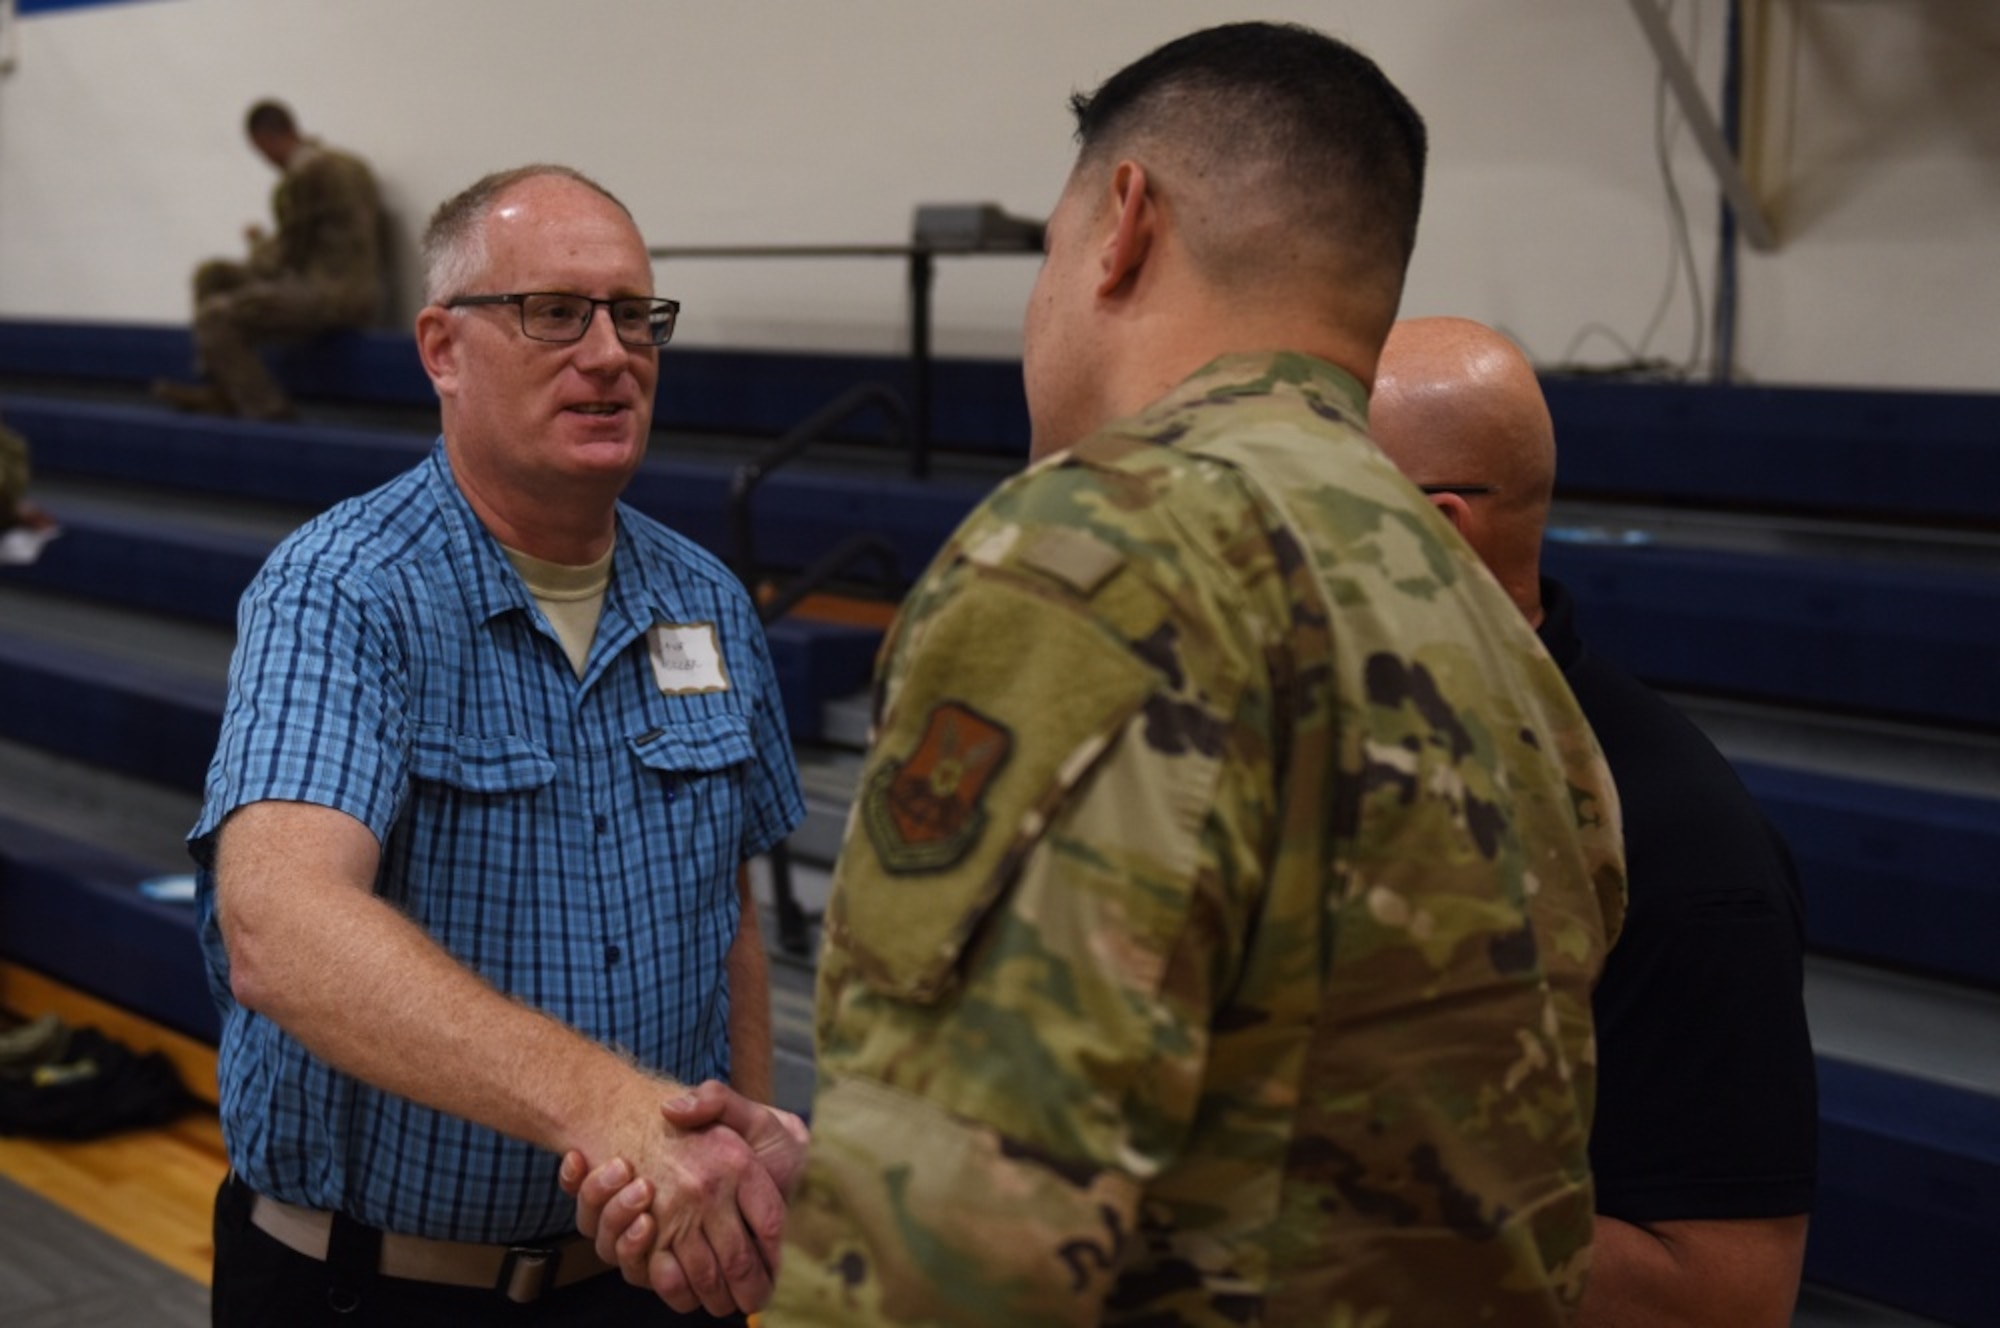 Lt. Col. Alan Haedge, 341st Communications Squadron commander, speaks with an Air Force Global Strike Command representative during a Local Integrated Response Plan exercise Aug. 26, 2019, at Augusta, Mont. The LIRP exercise provides a training opportunity for experts from the 341st Missile Wing and multiple federal, state, local and tribal agencies to practice contingency checklists and procedures in response to a simulated incident. (U.S. Air Force photo by Airman 1st Class Jacob M. Thompson)